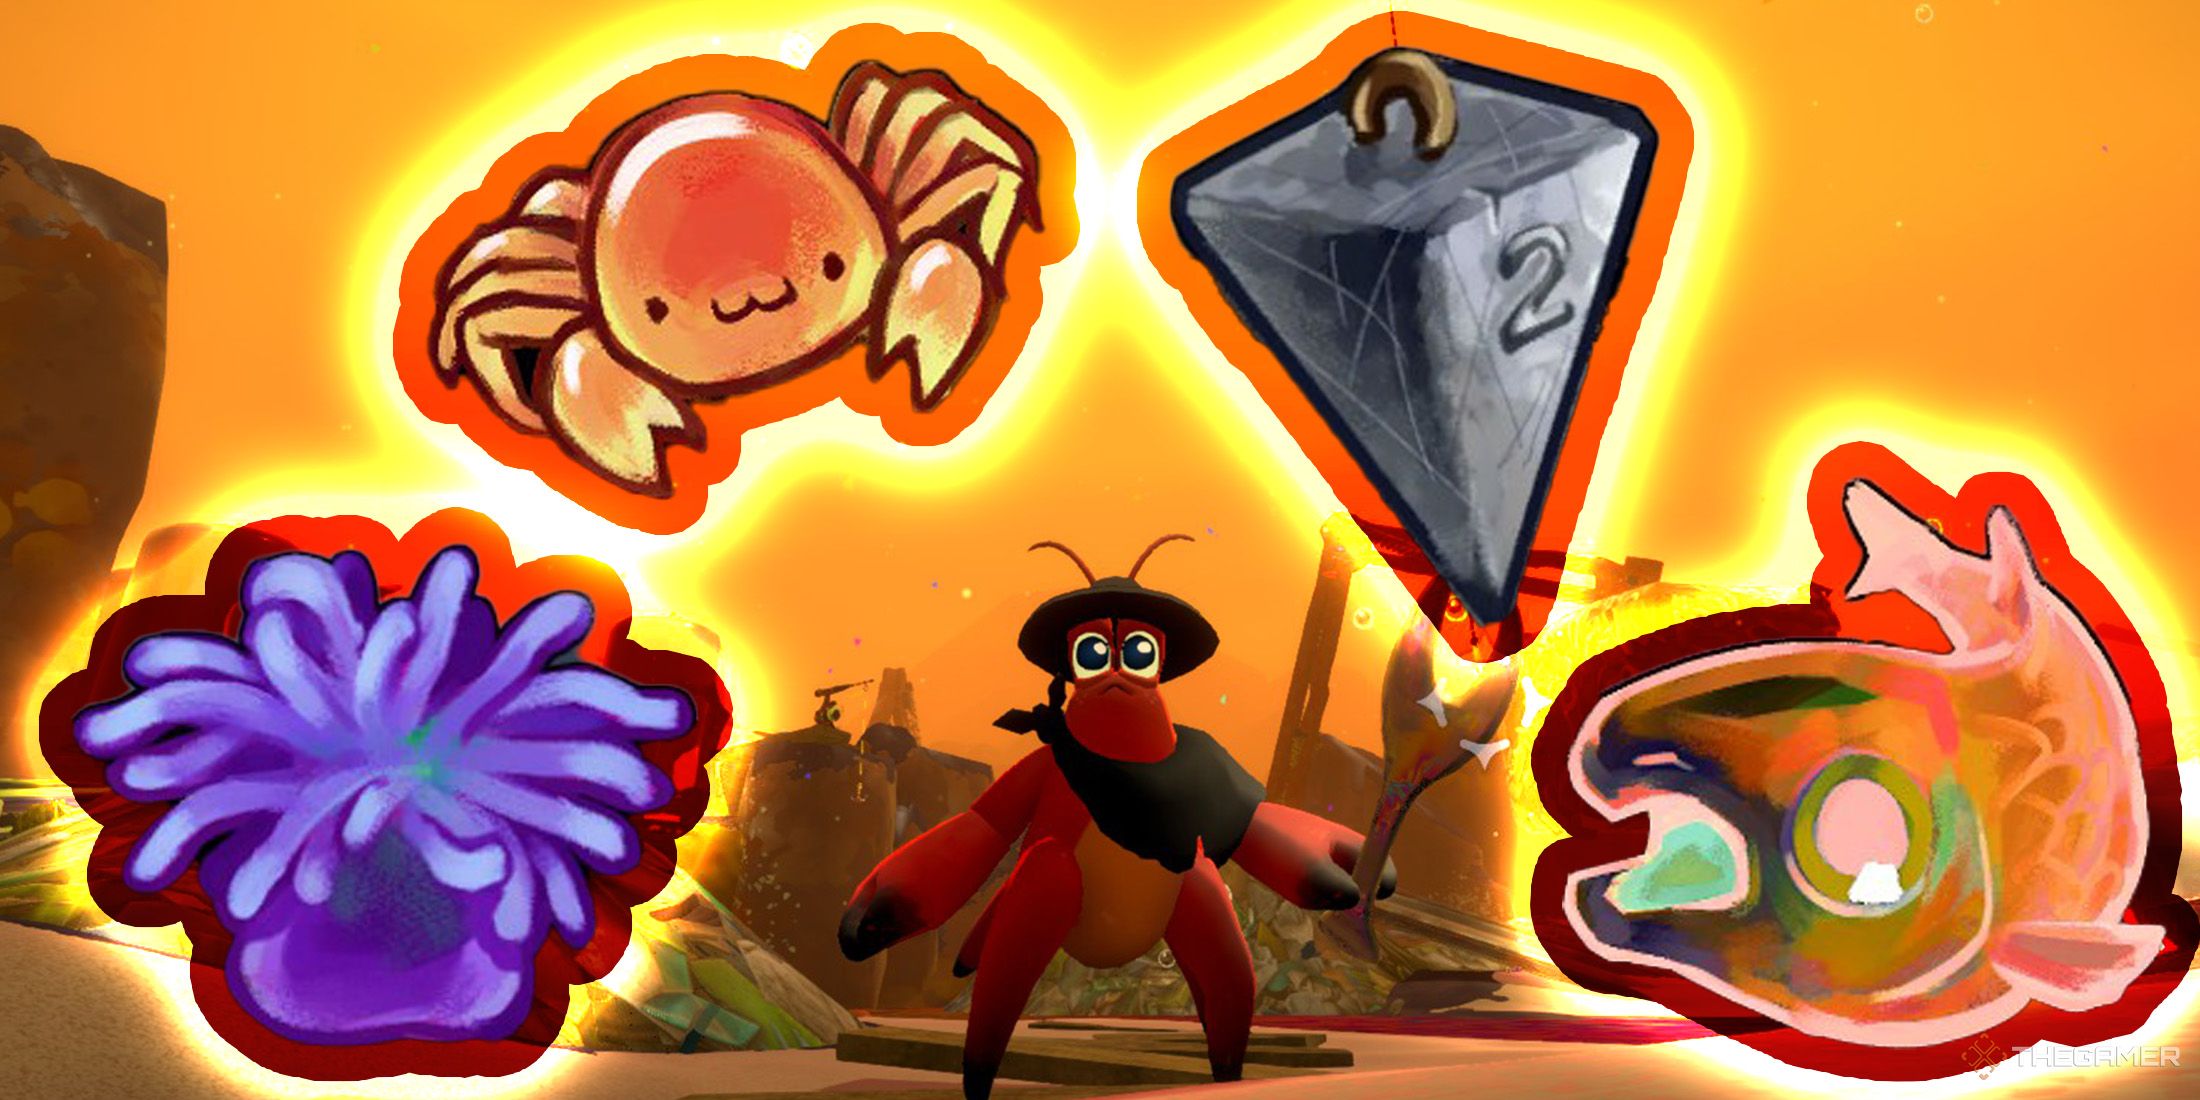 In Another Crab's Treasure, Kril poses wearing the adventurer outfit with four stowaway icons around